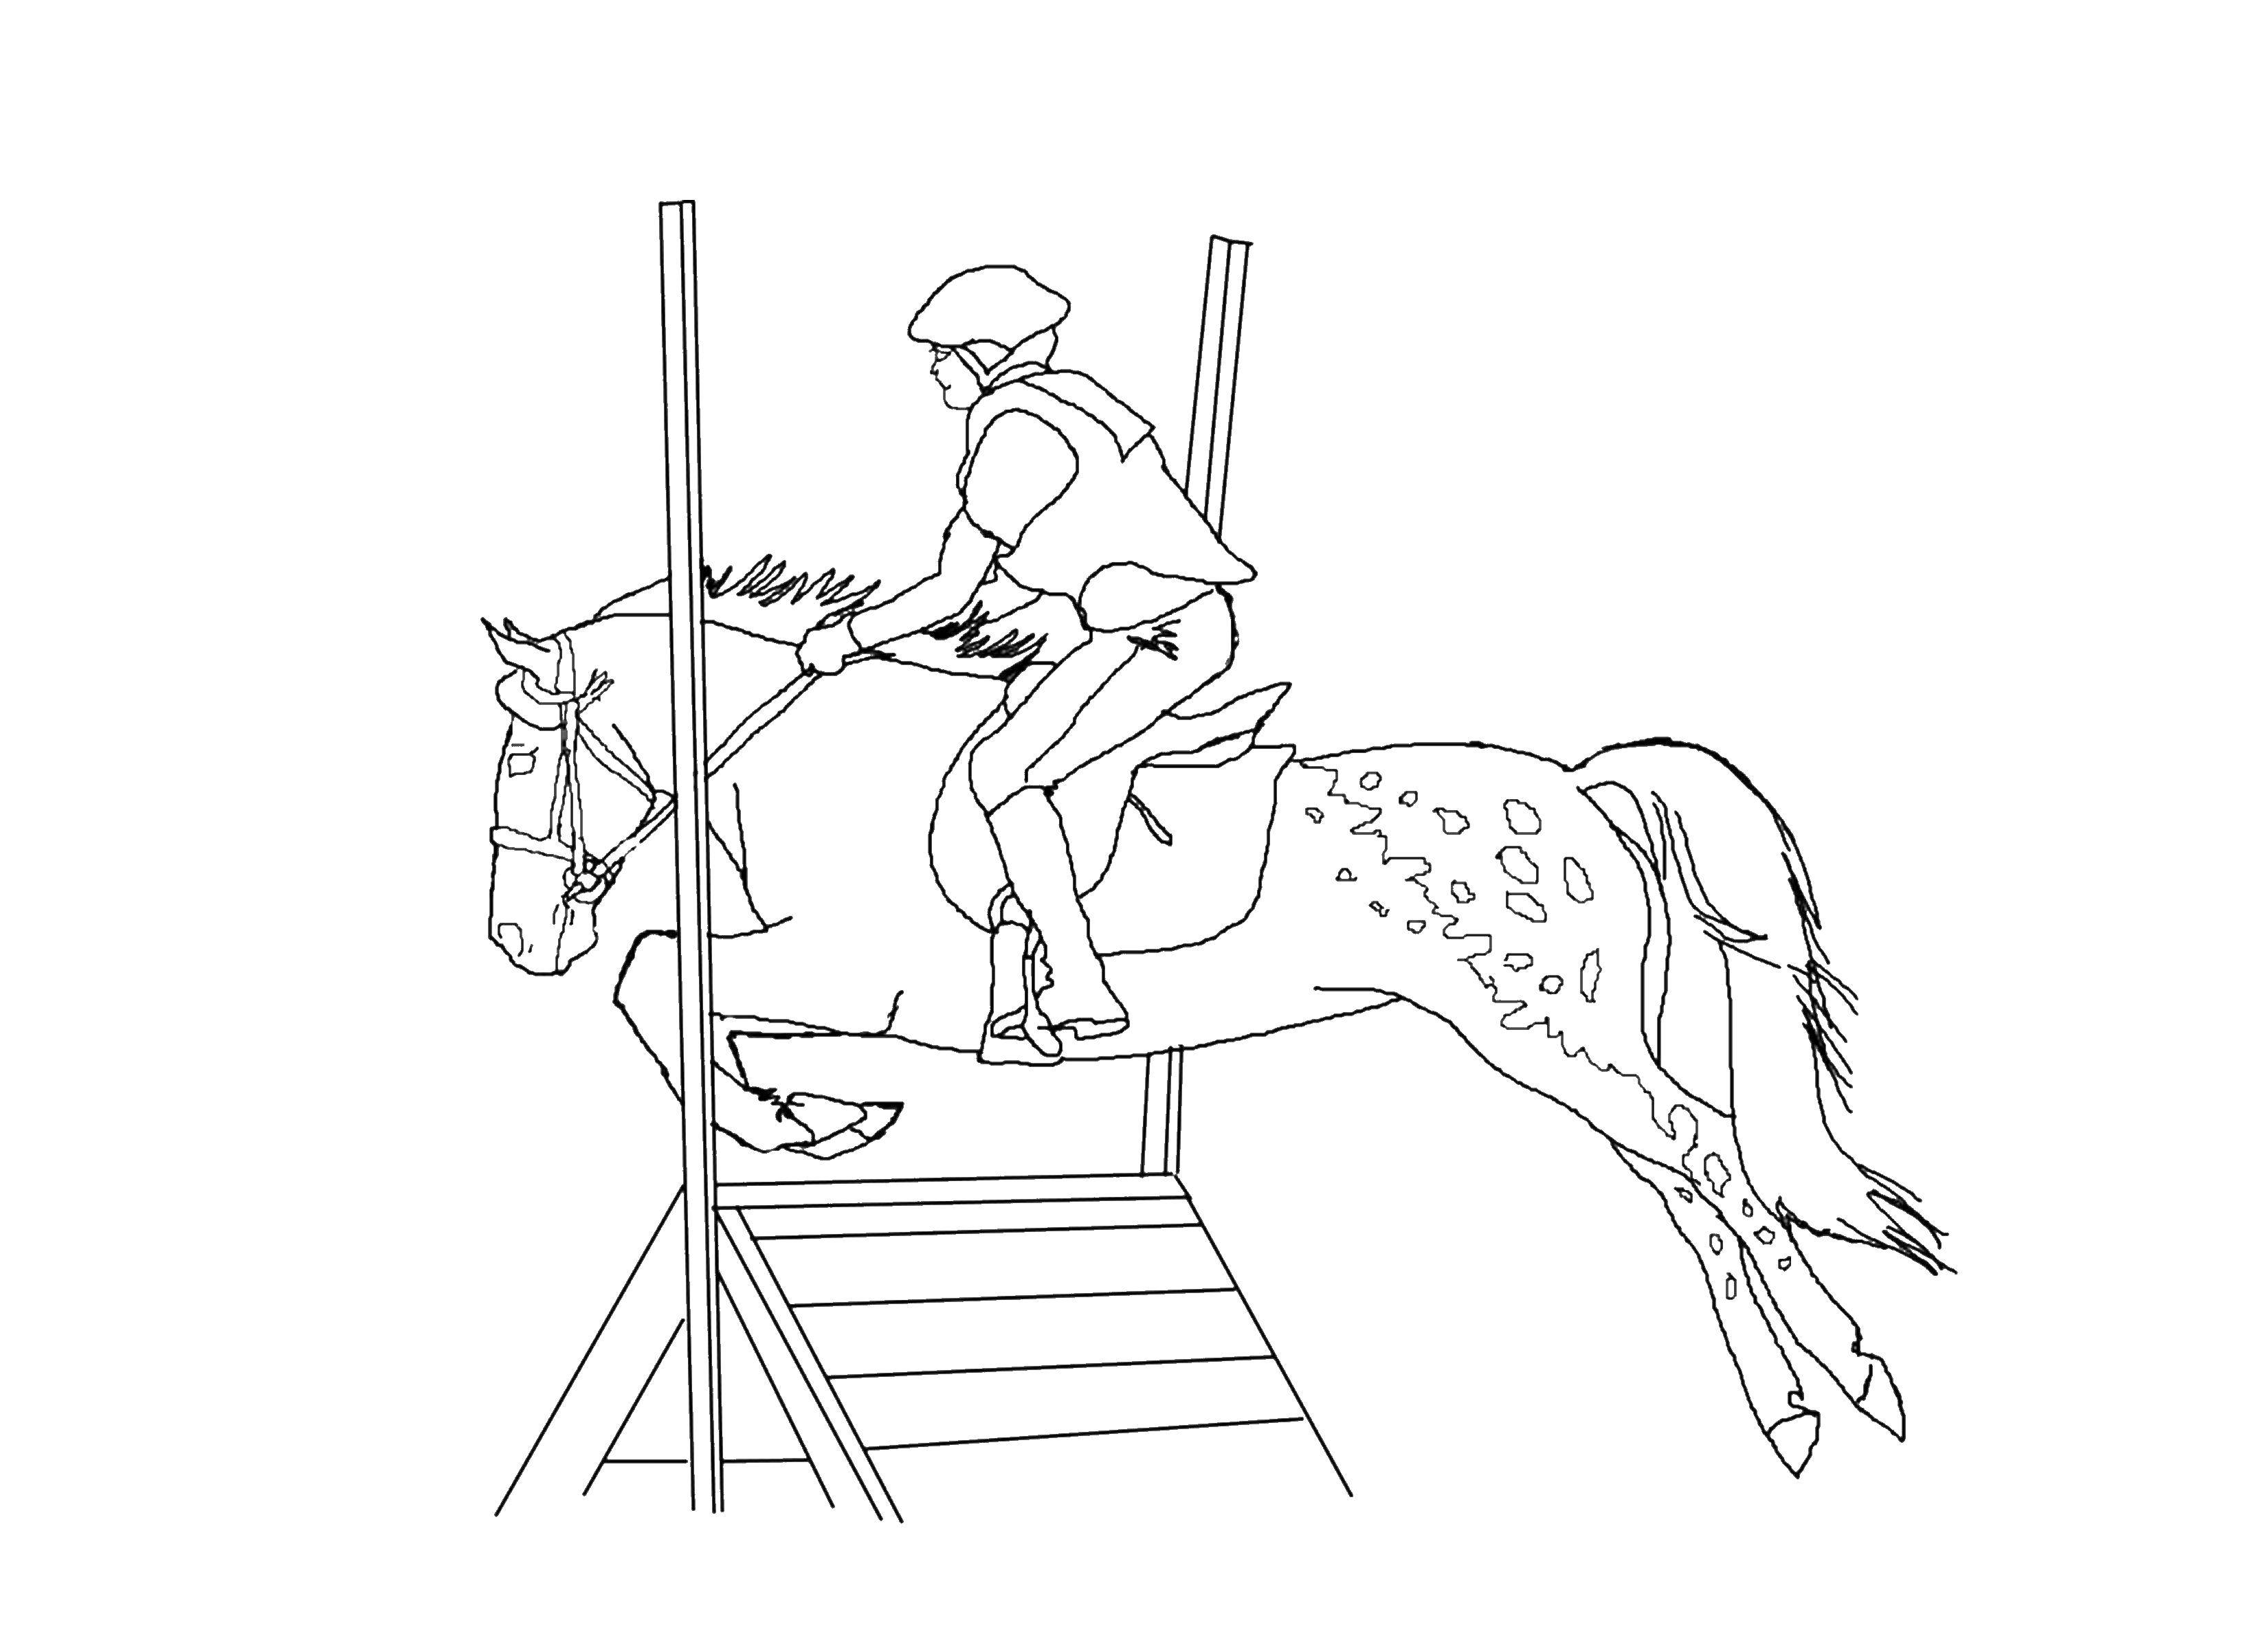 Coloring The rider on the horse. Category Animals. Tags:  animals, horse, horse, horse racing.